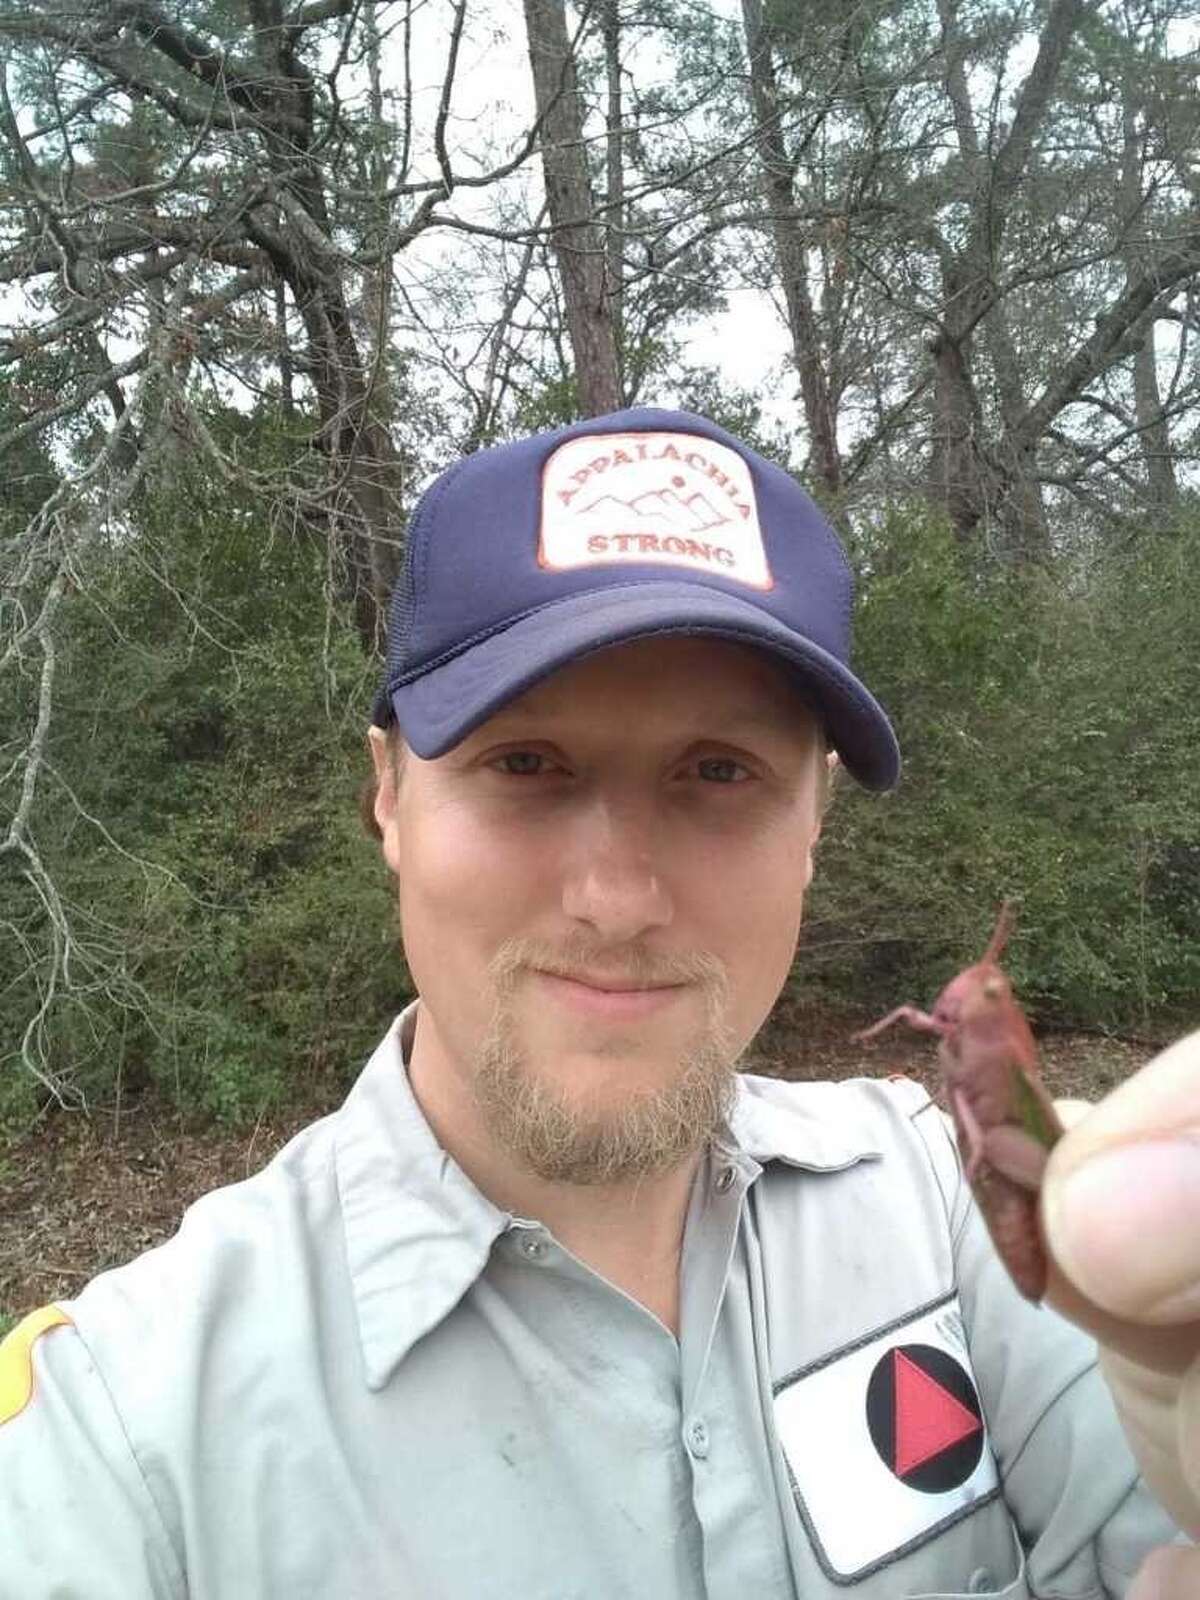 Dirk Parker, an Ohio man working in East Texas, found a rare pink grasshopper while exploring nature. 